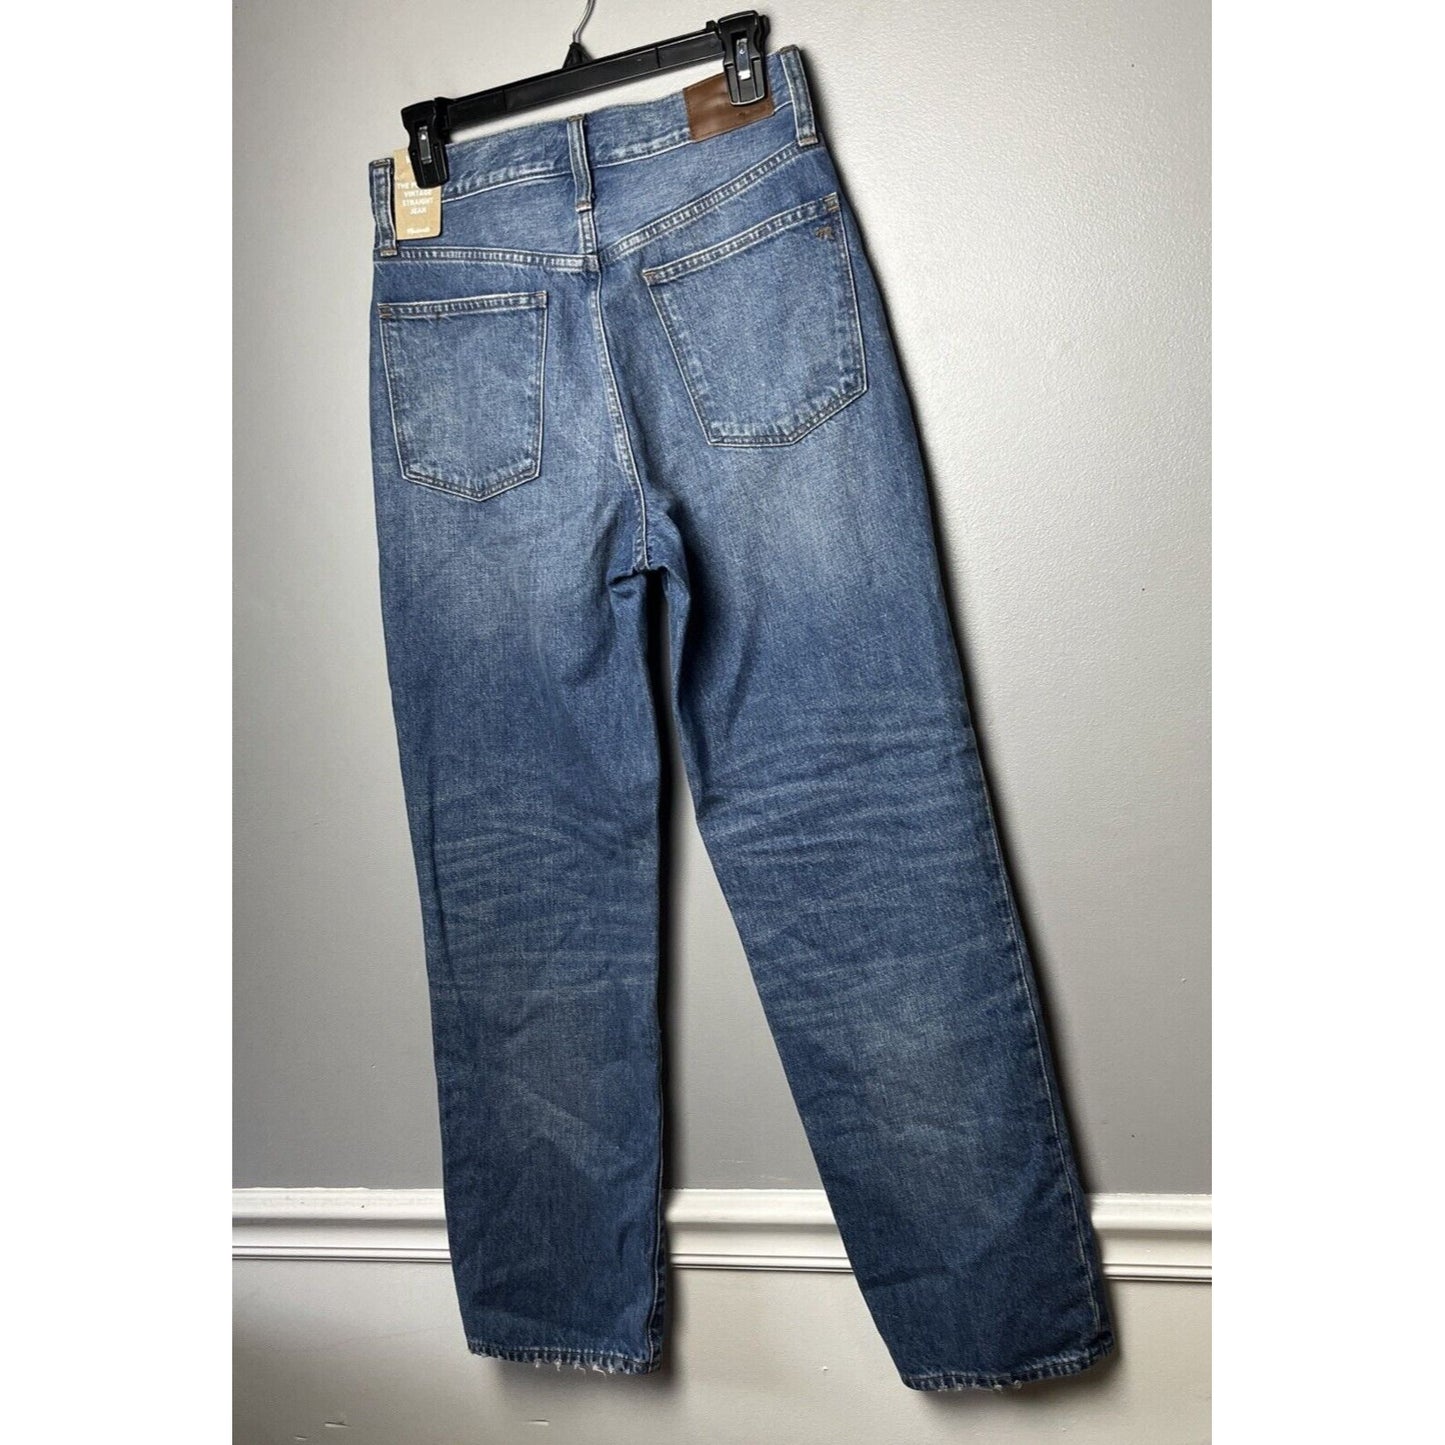 Madewell Jeans Size 26 The Perfect Vintage Straight Jean in Moultrie Wash